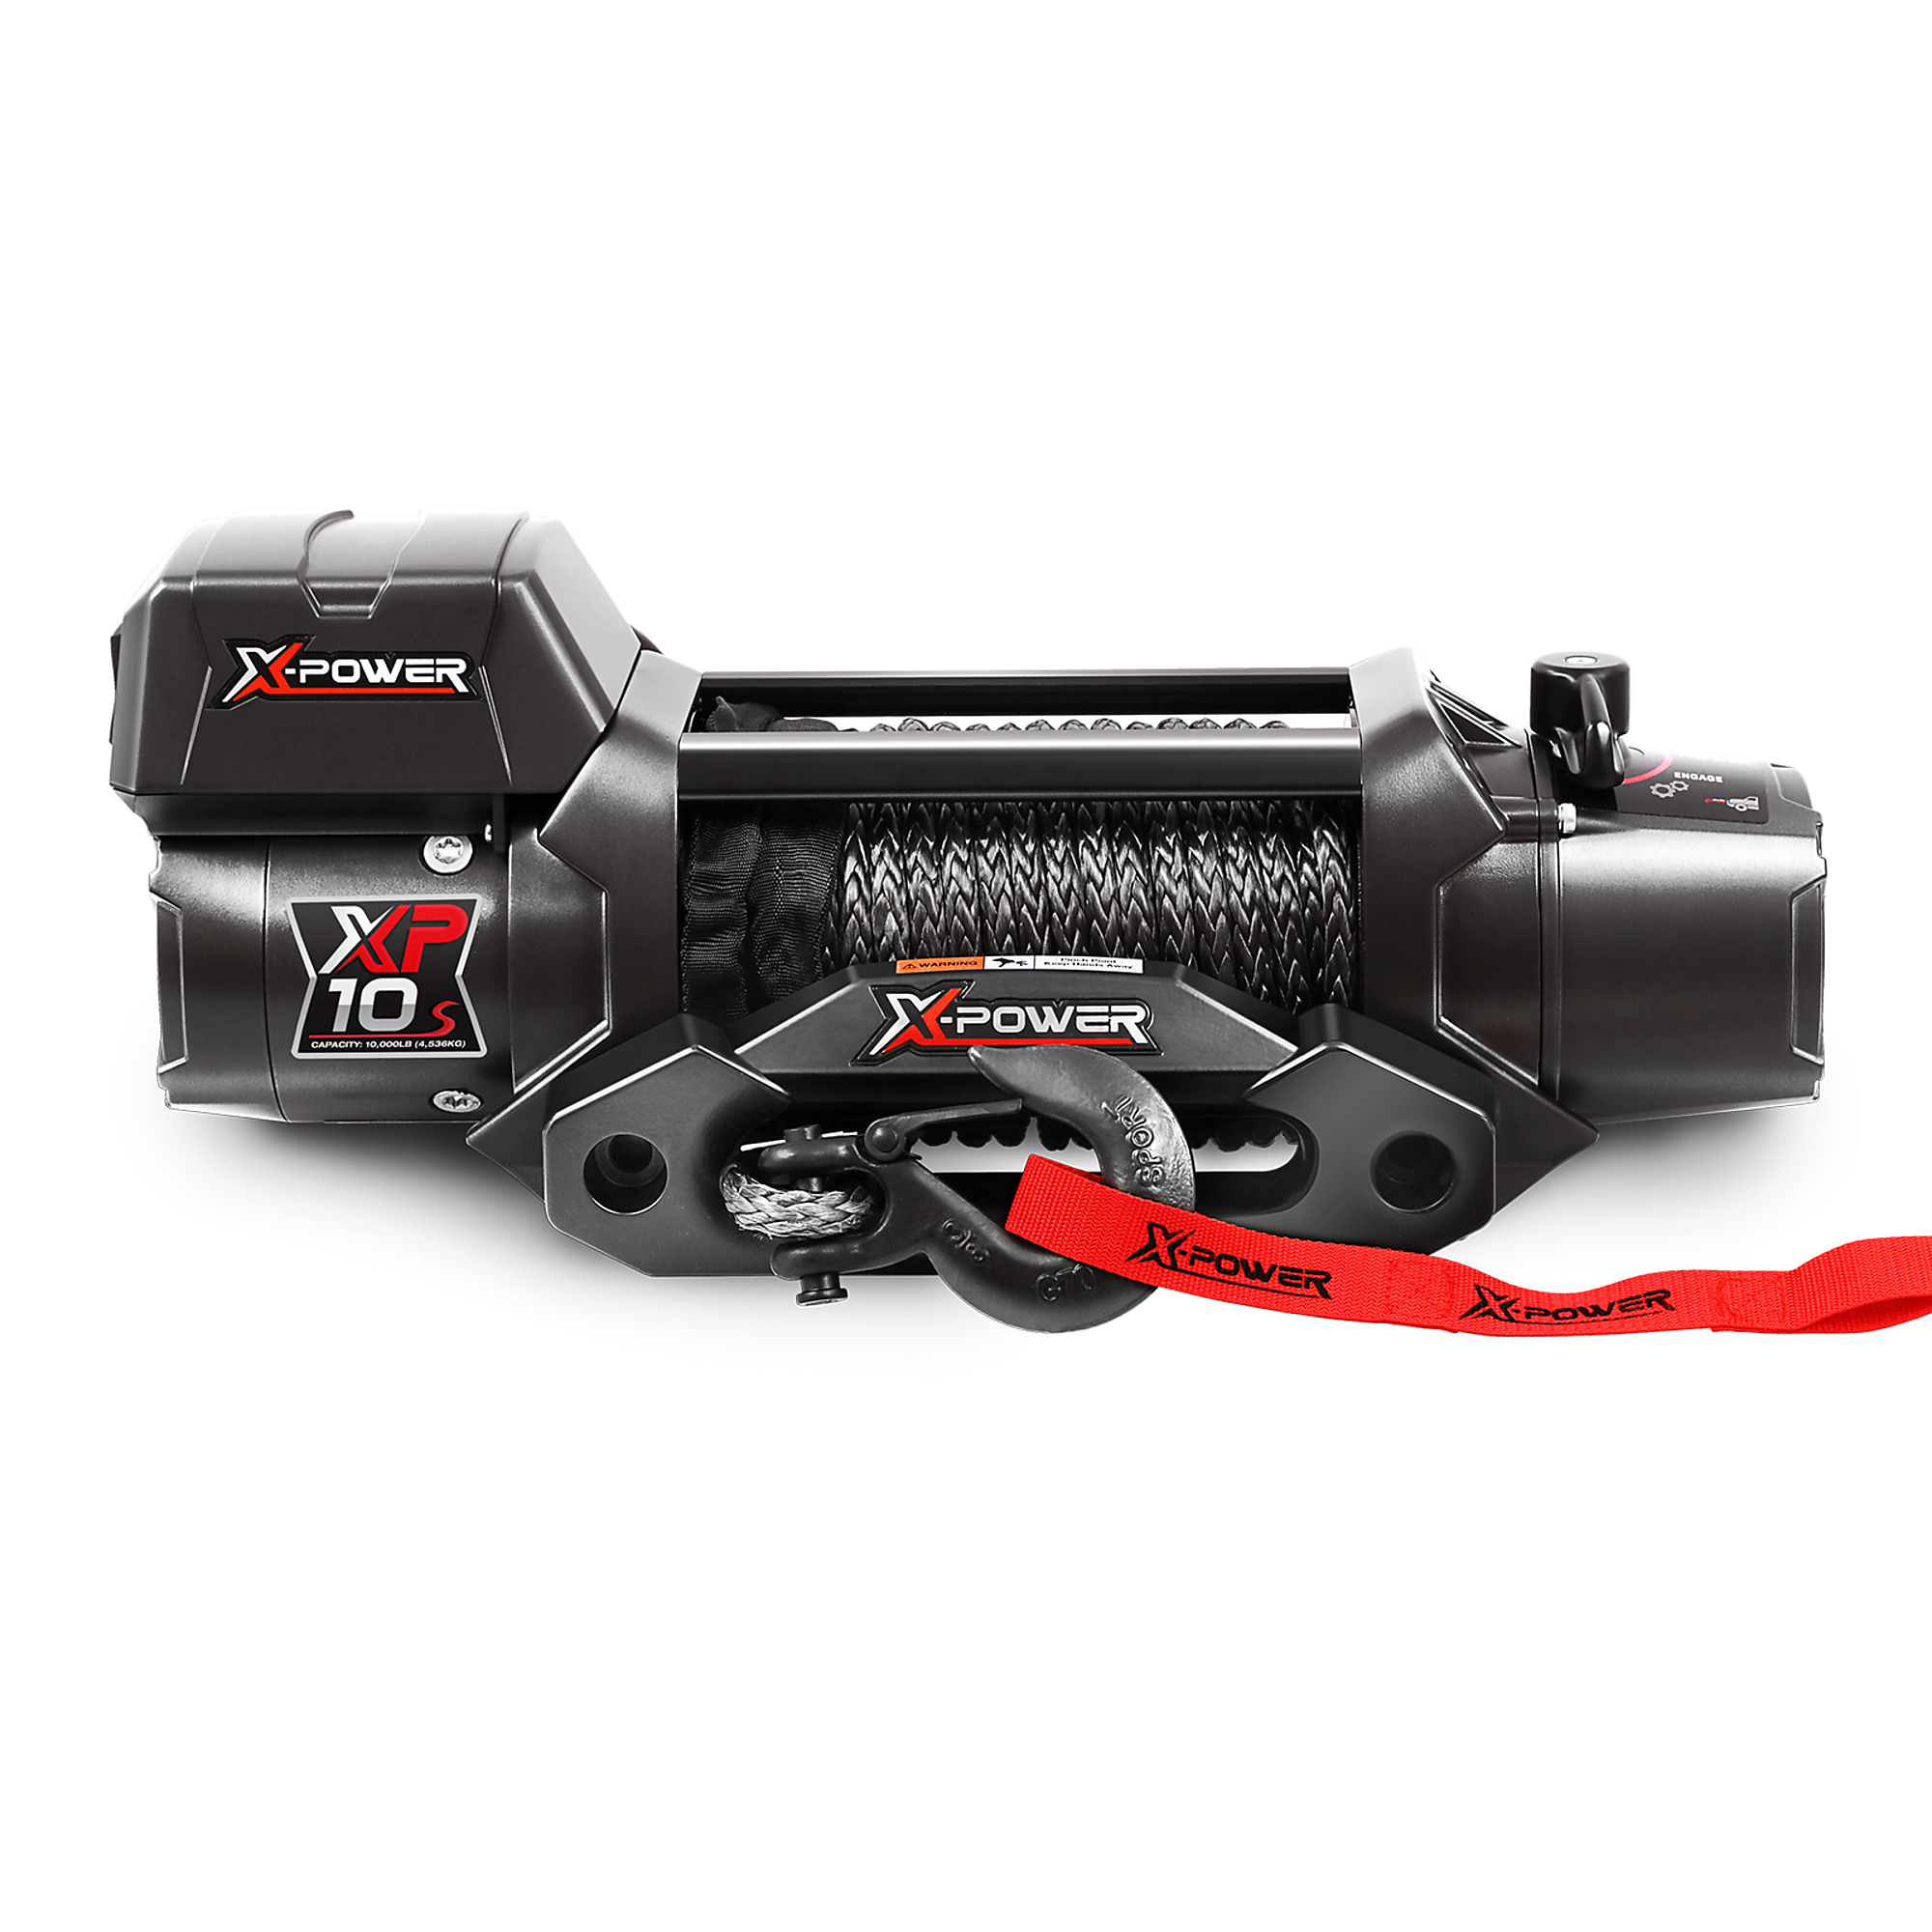 XPower, 10000 LBS. WINCH NON-INTEGRATED - SYNTHETIC, Capacity (Line Pull) 10000 lb, Model 10802008